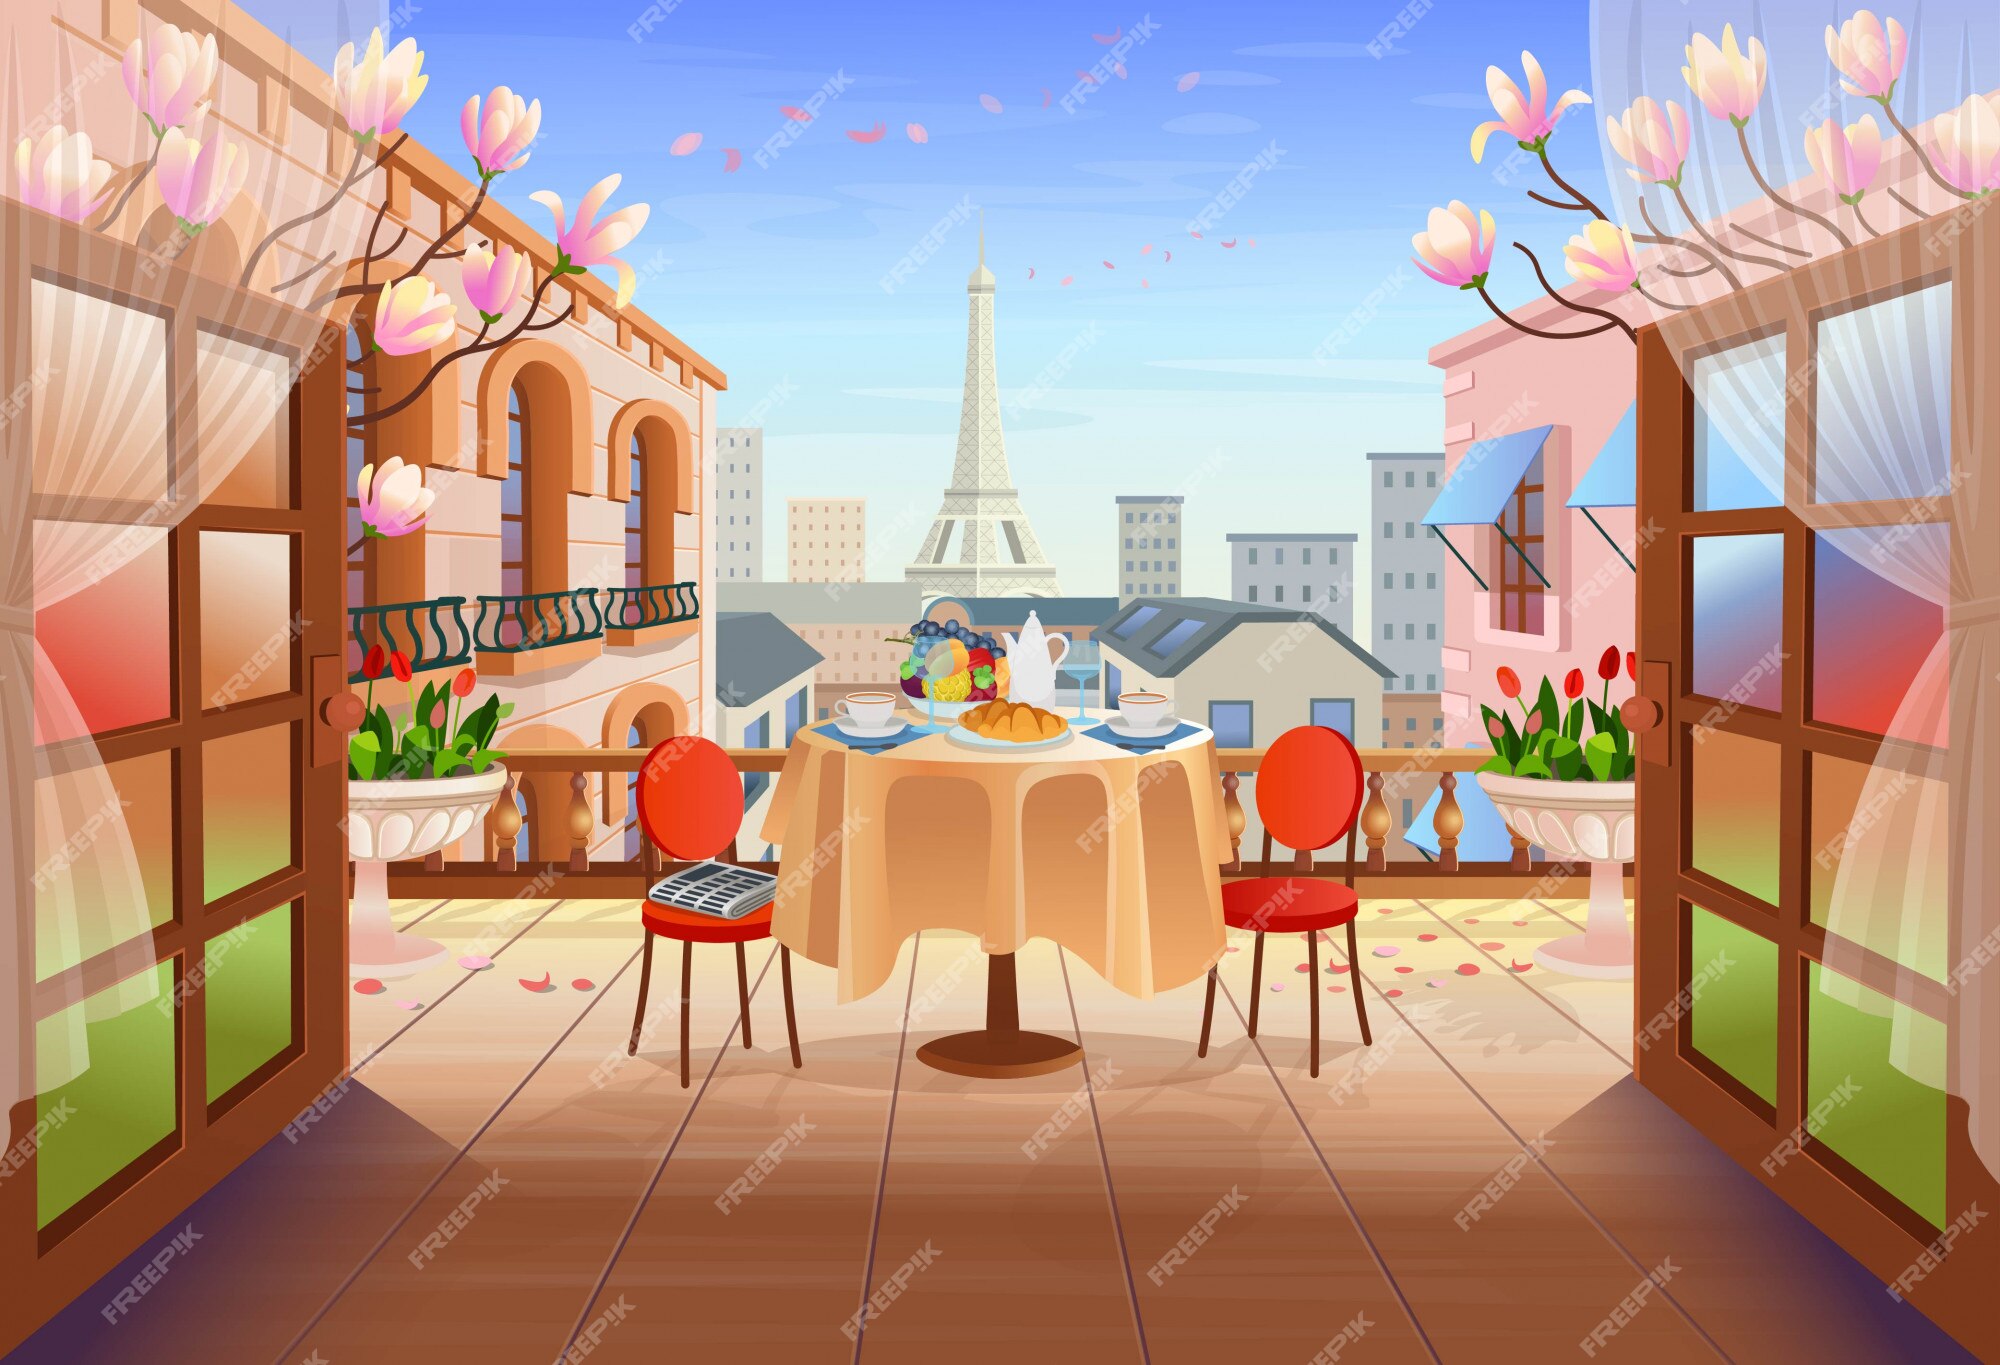 Premium Vector | Panorama paris street with open doors, table with chairs,  old houses, tower and flowers. exit to the terrace with city view  illustration of city street in cartoon style.